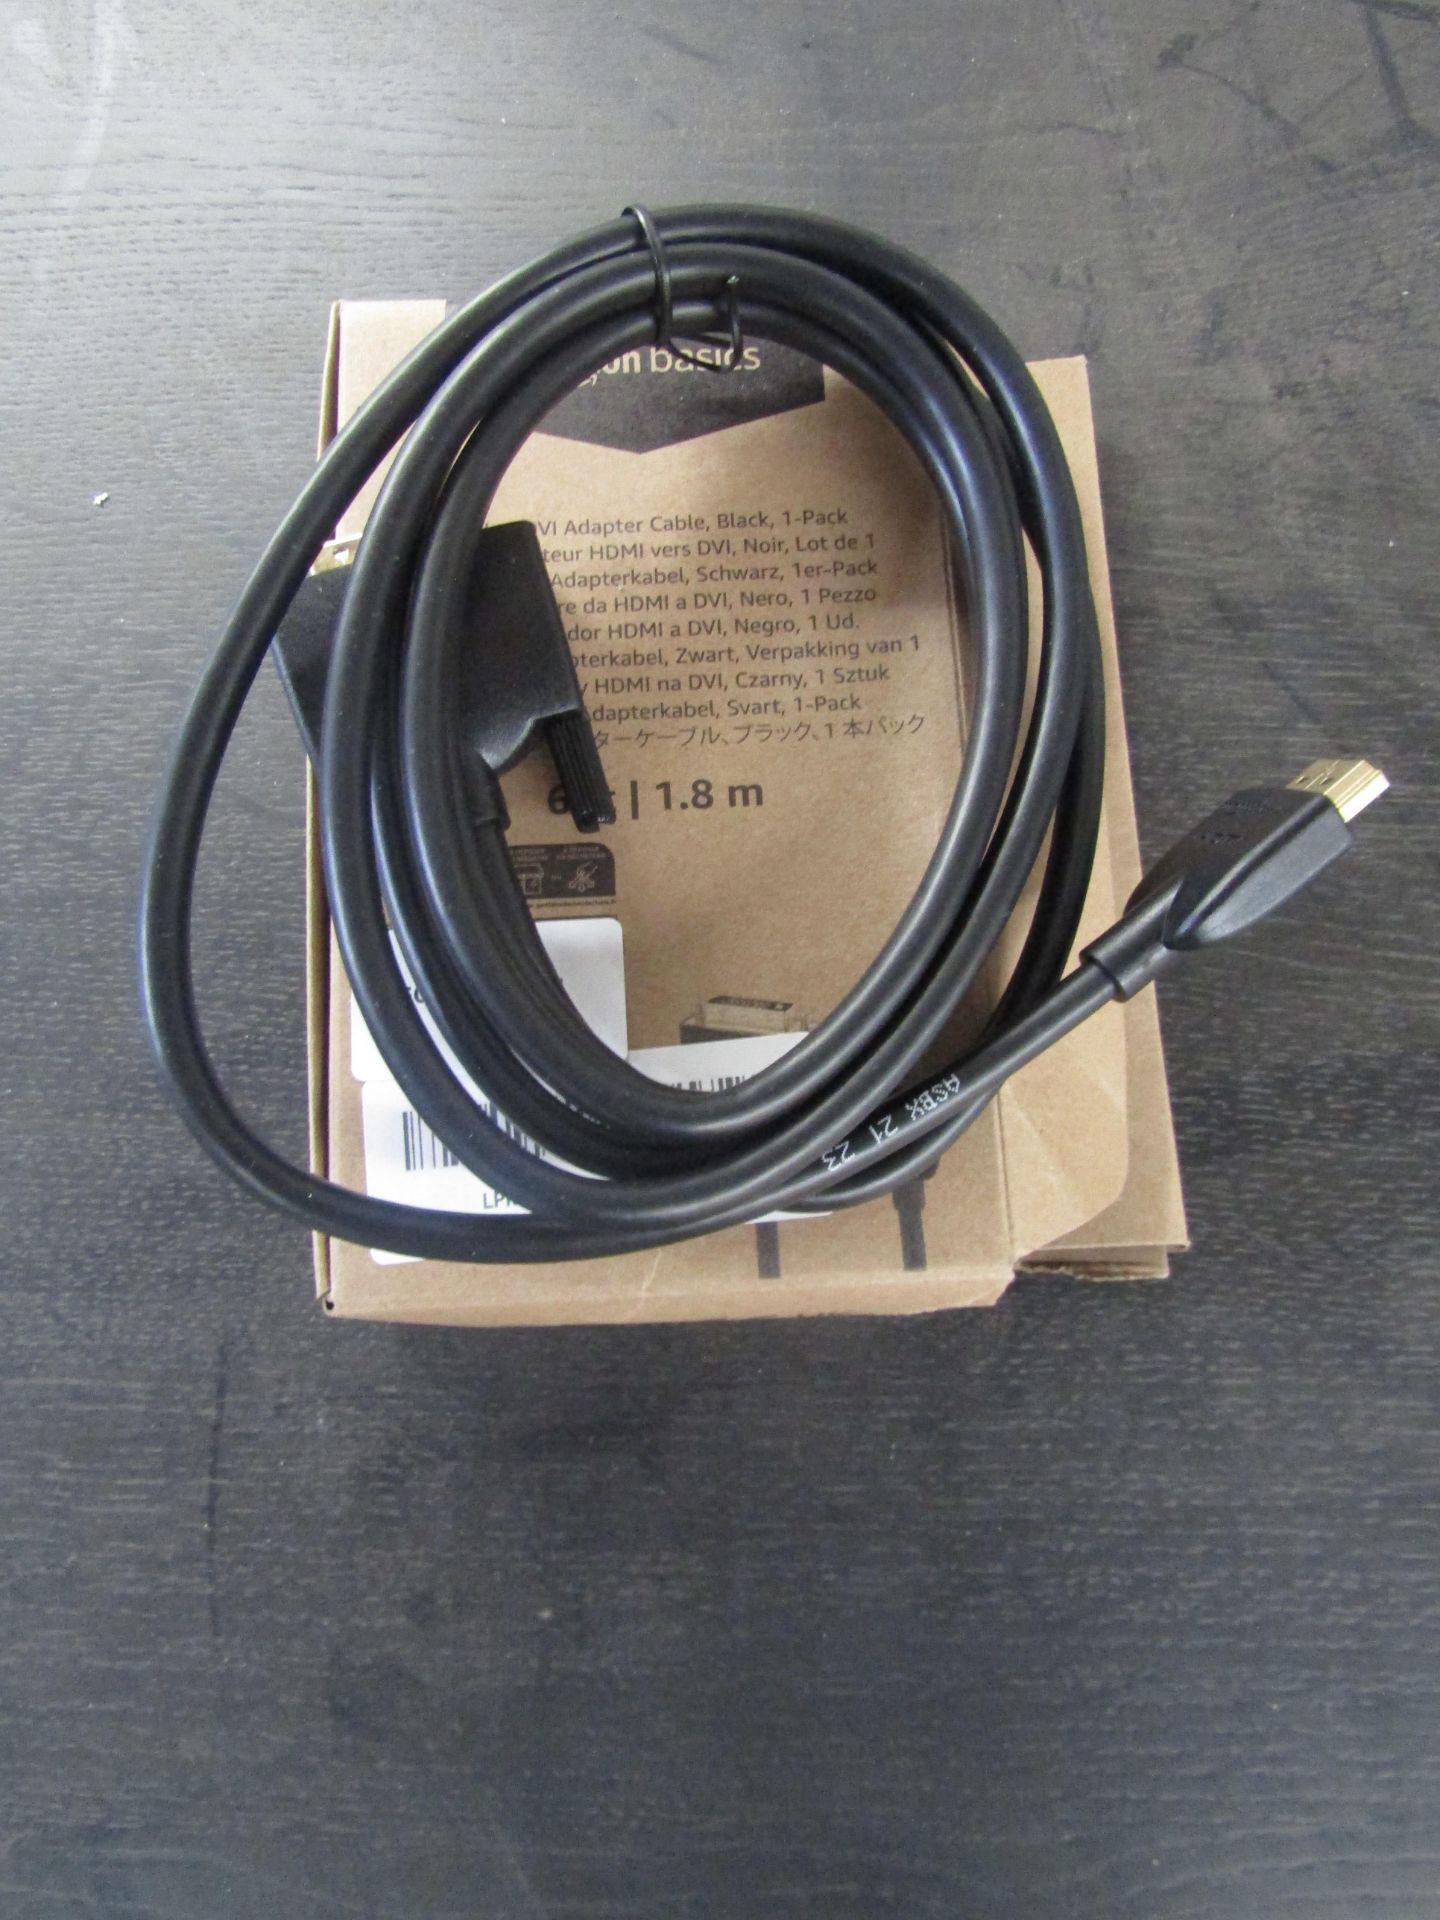 Aamzon Basics HDMI To DVI Adapter Cable - Untested & Boxed.